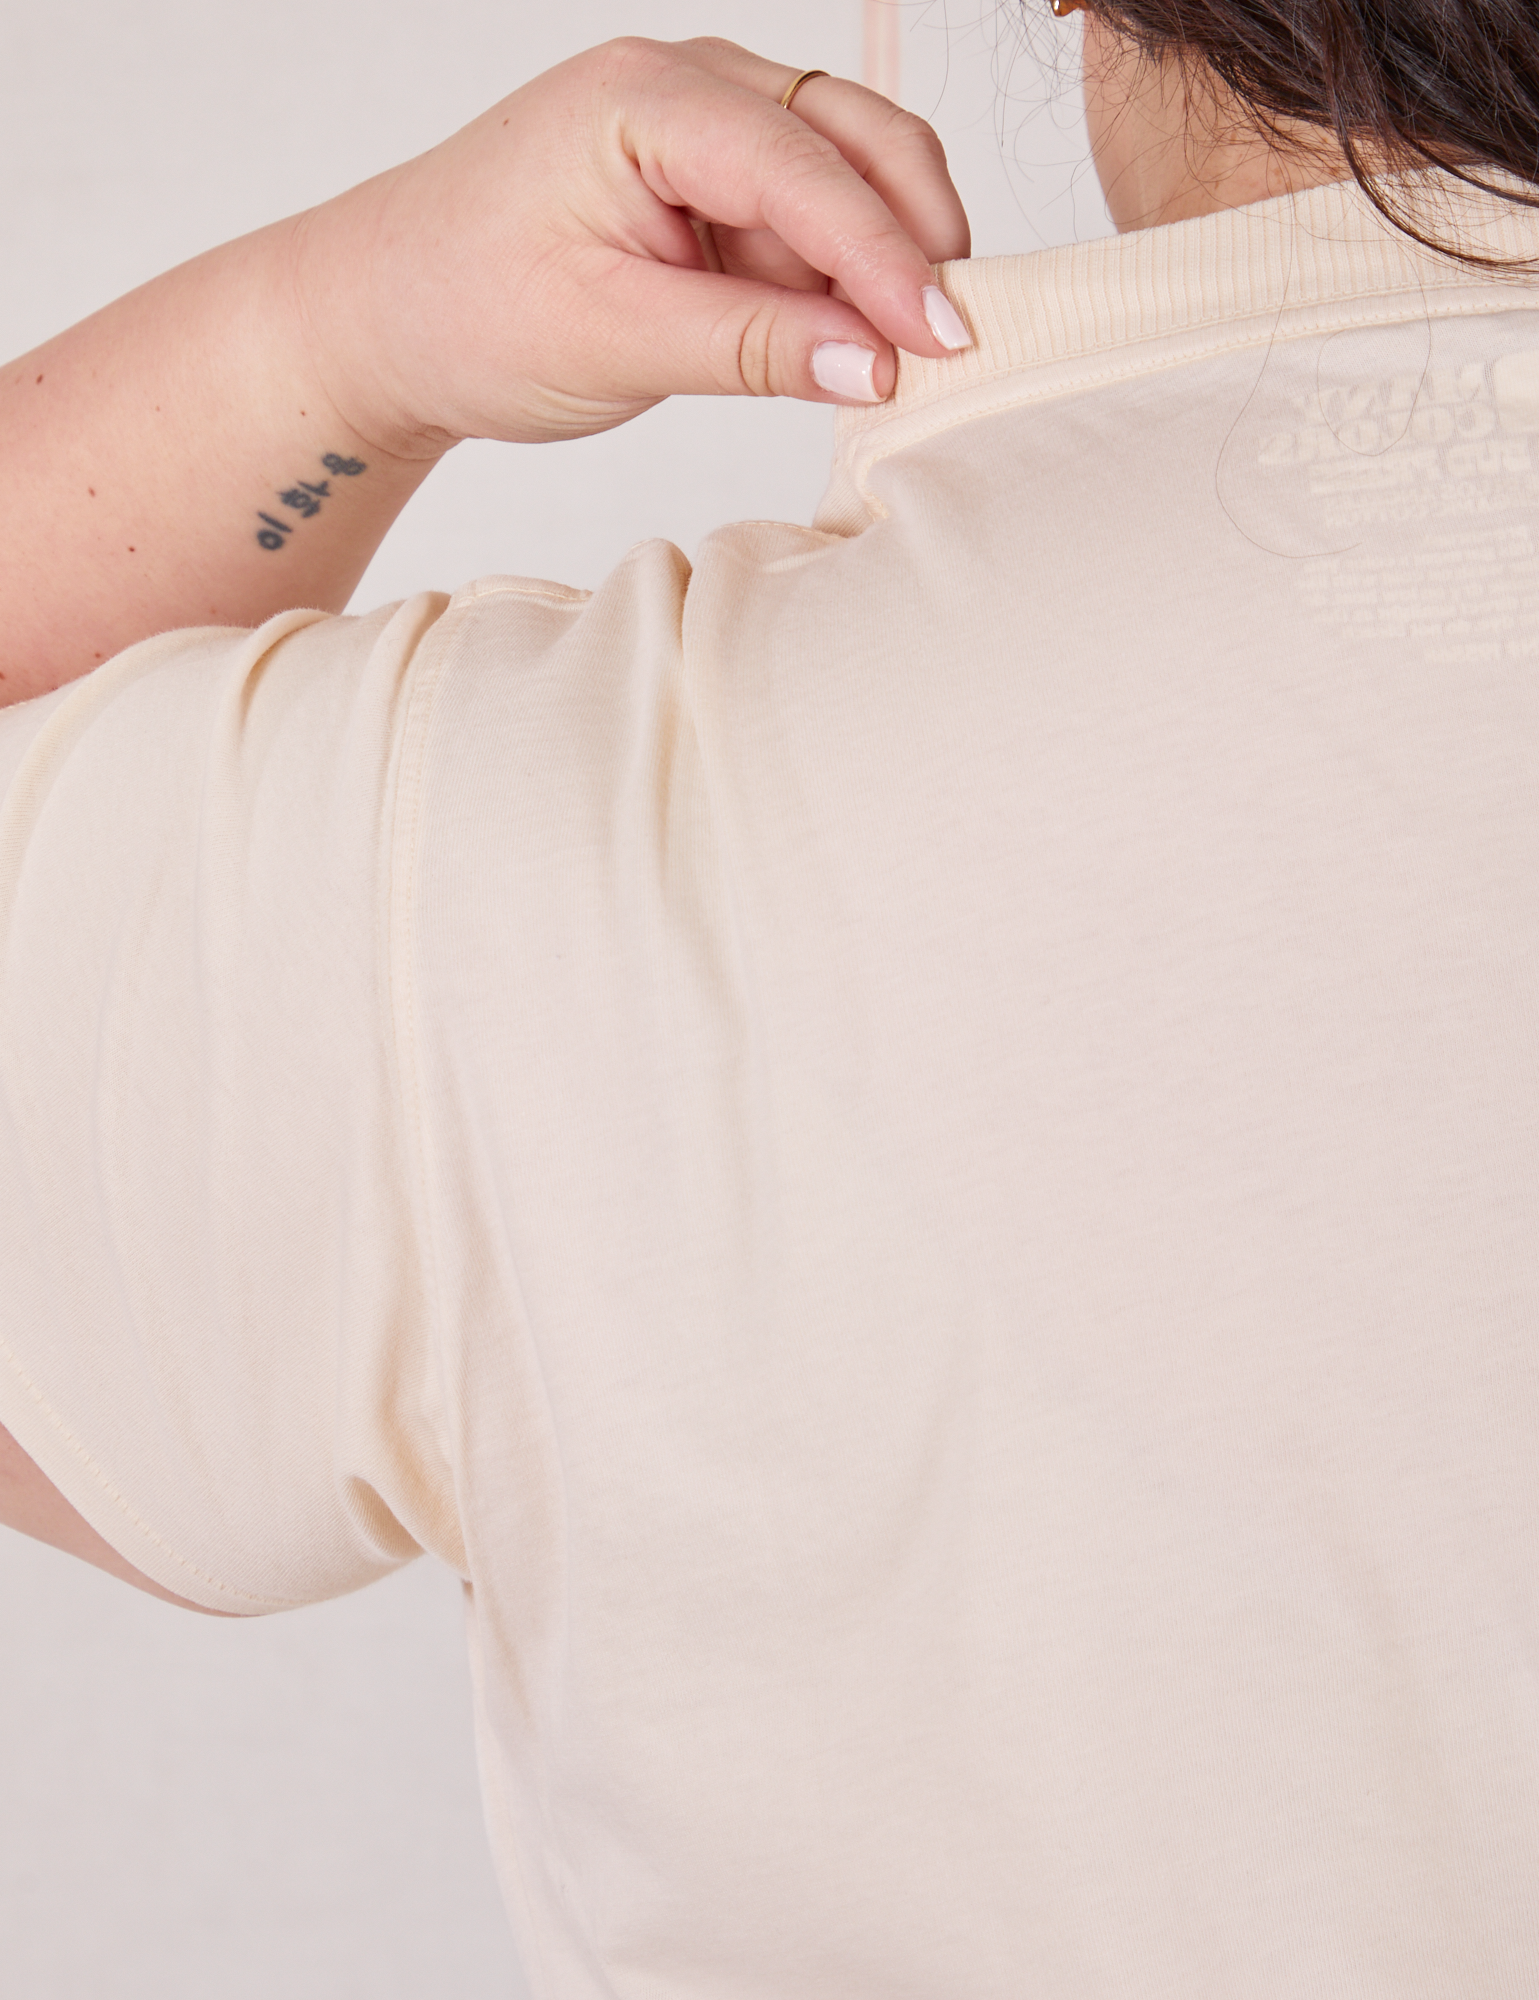 Organic Vintage Tee in Vintage Tee Off-White back close up on Ashley